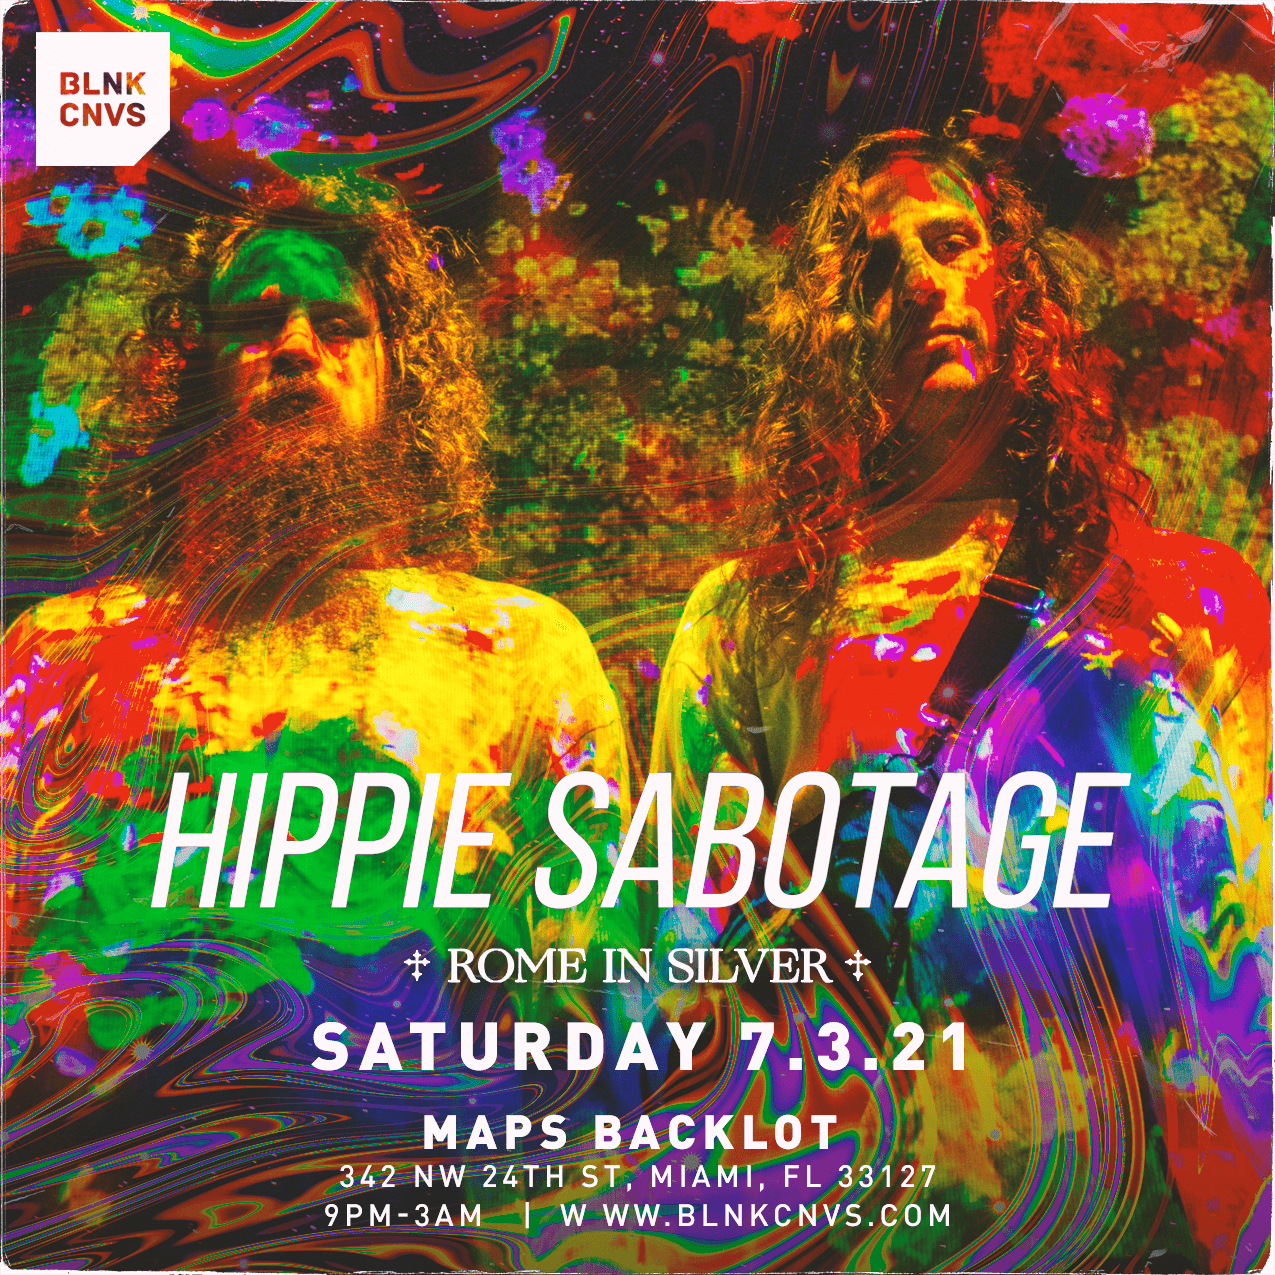 HIPPIE SABOTAGE MAPS BACKLOT Tickets at MAPS Backlot in Miami by BLNK